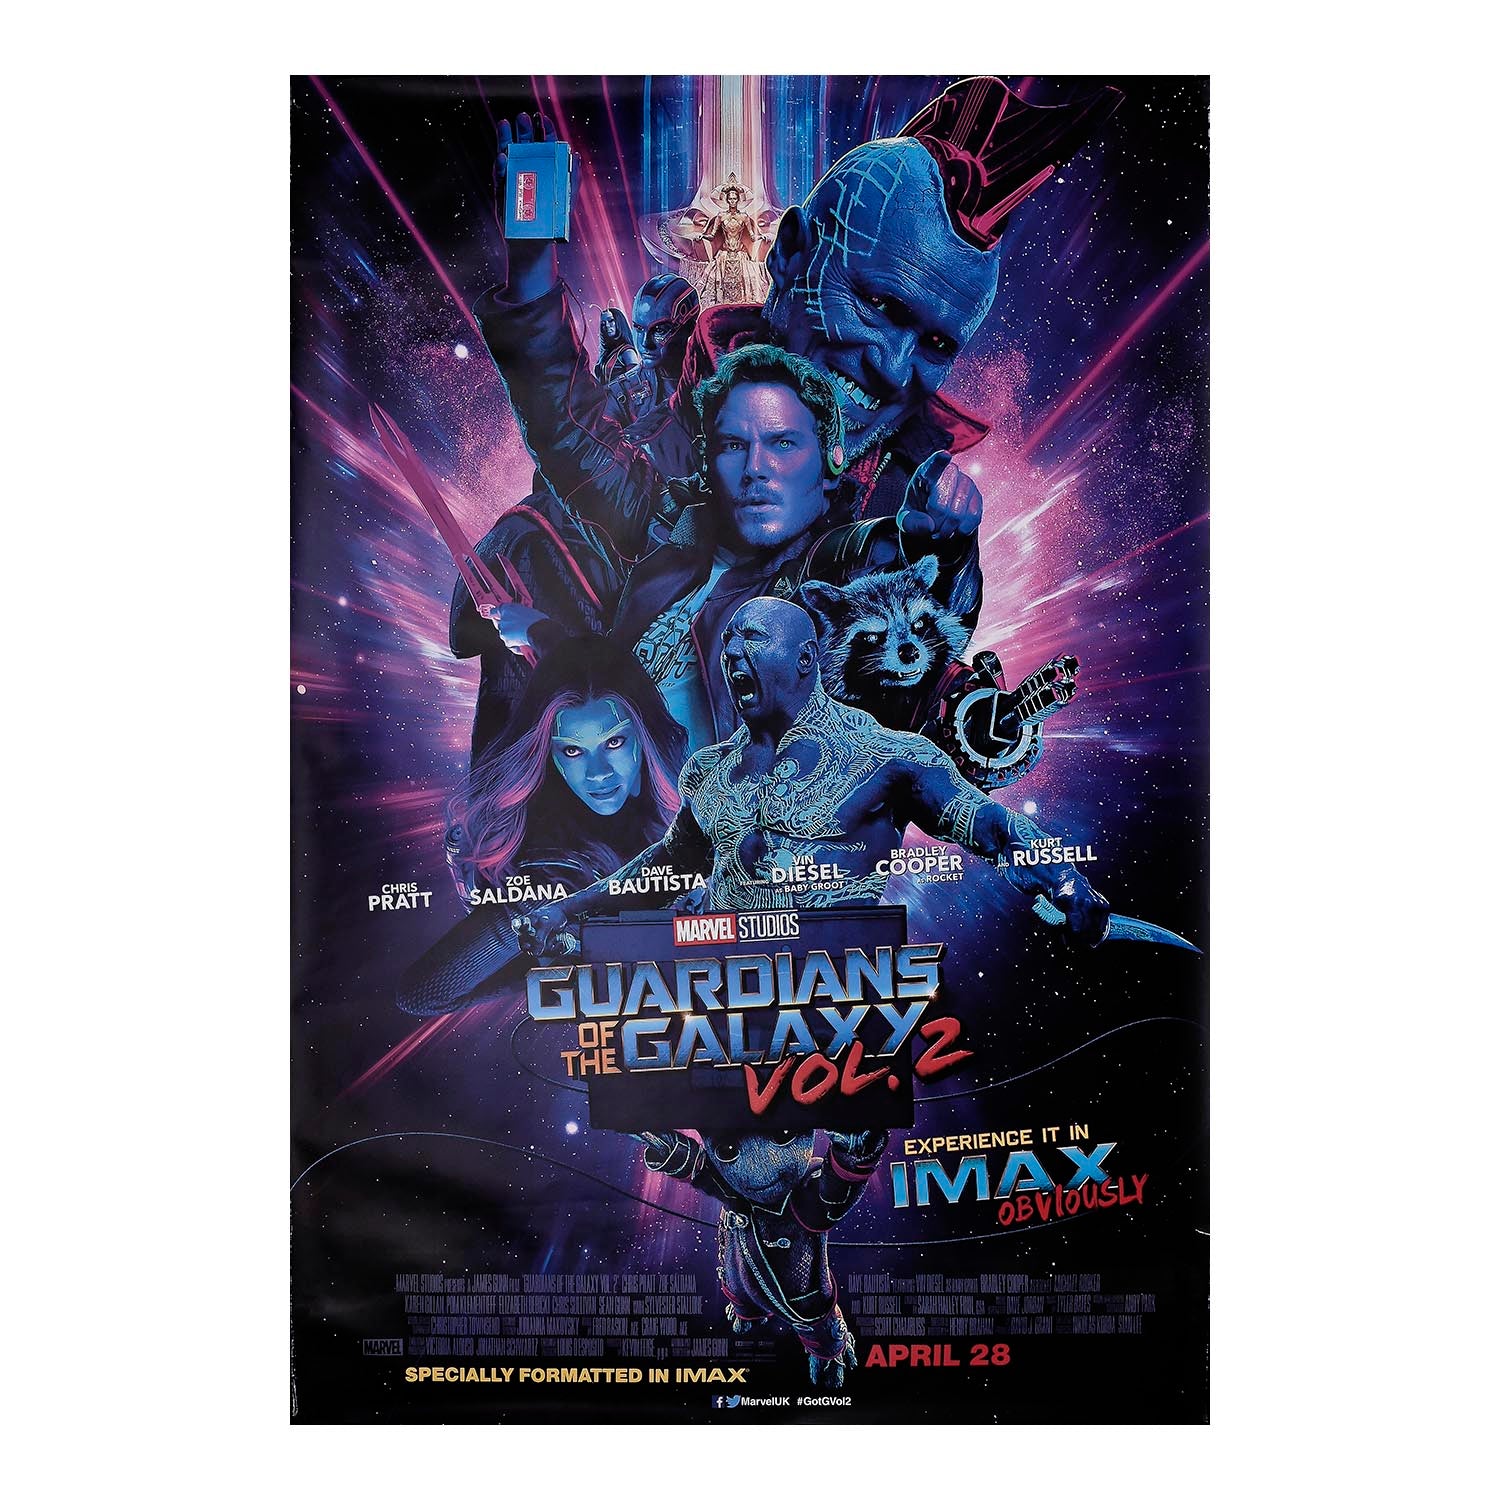 Original, large format, back-lit film poster for the release of Guardians of the Galaxy Vol. 2, IMAX, 2017. The poster was specially produced for display at IMAX cinemas and features exclusive artwork of the leading cast members